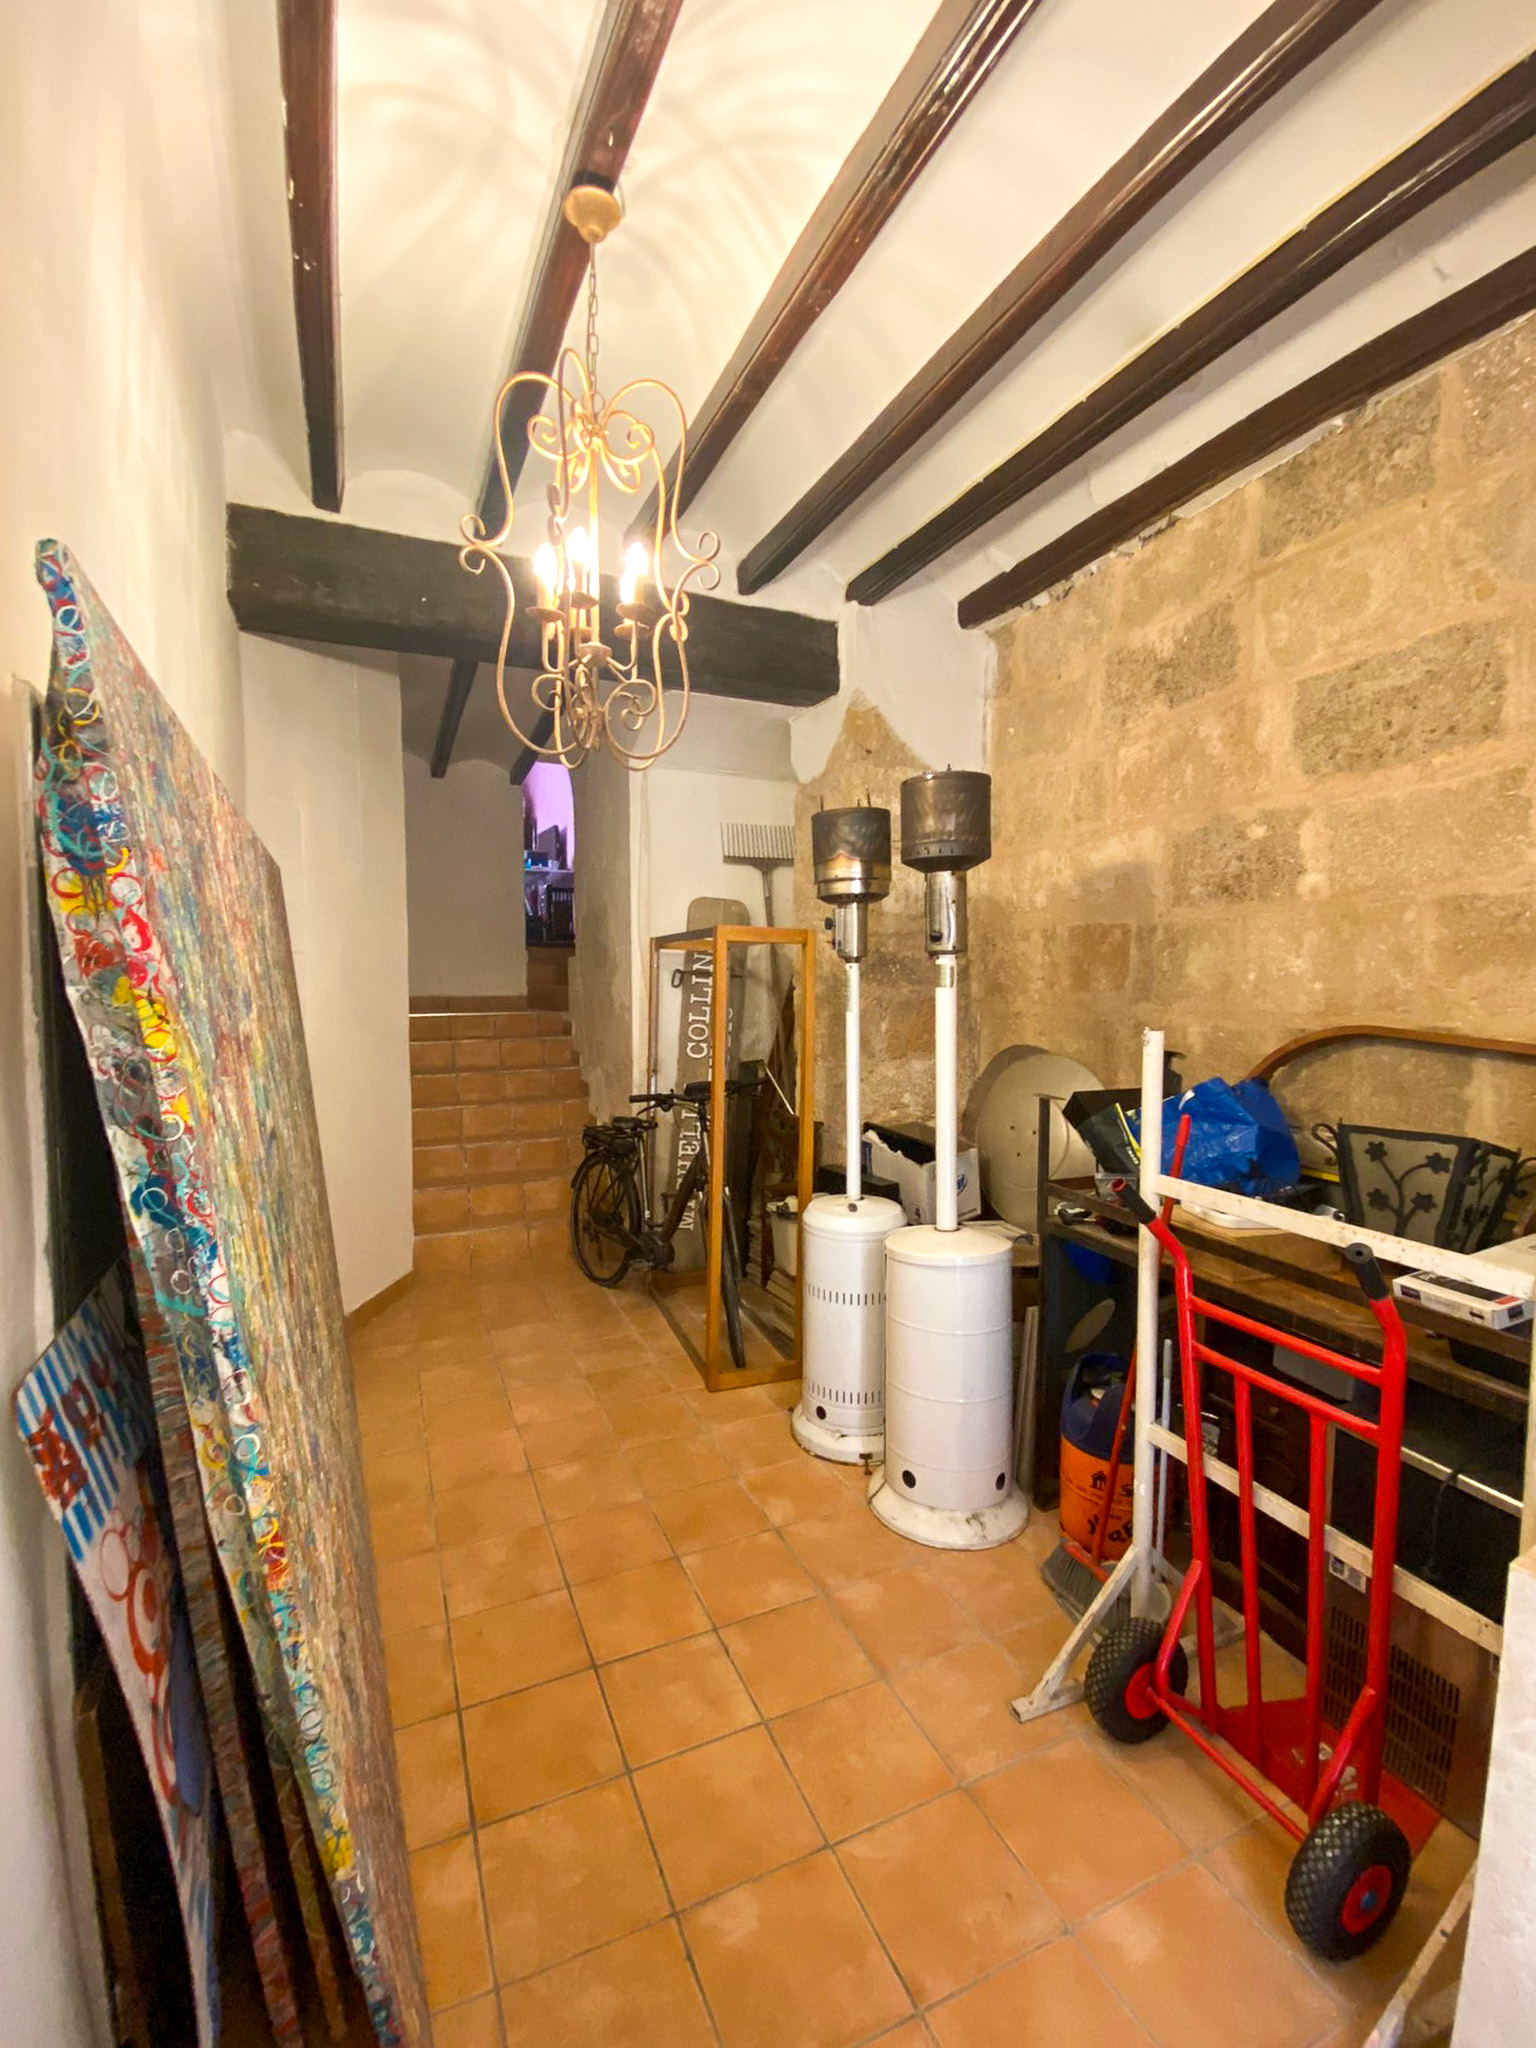 For Sale. Townhouse in Javea